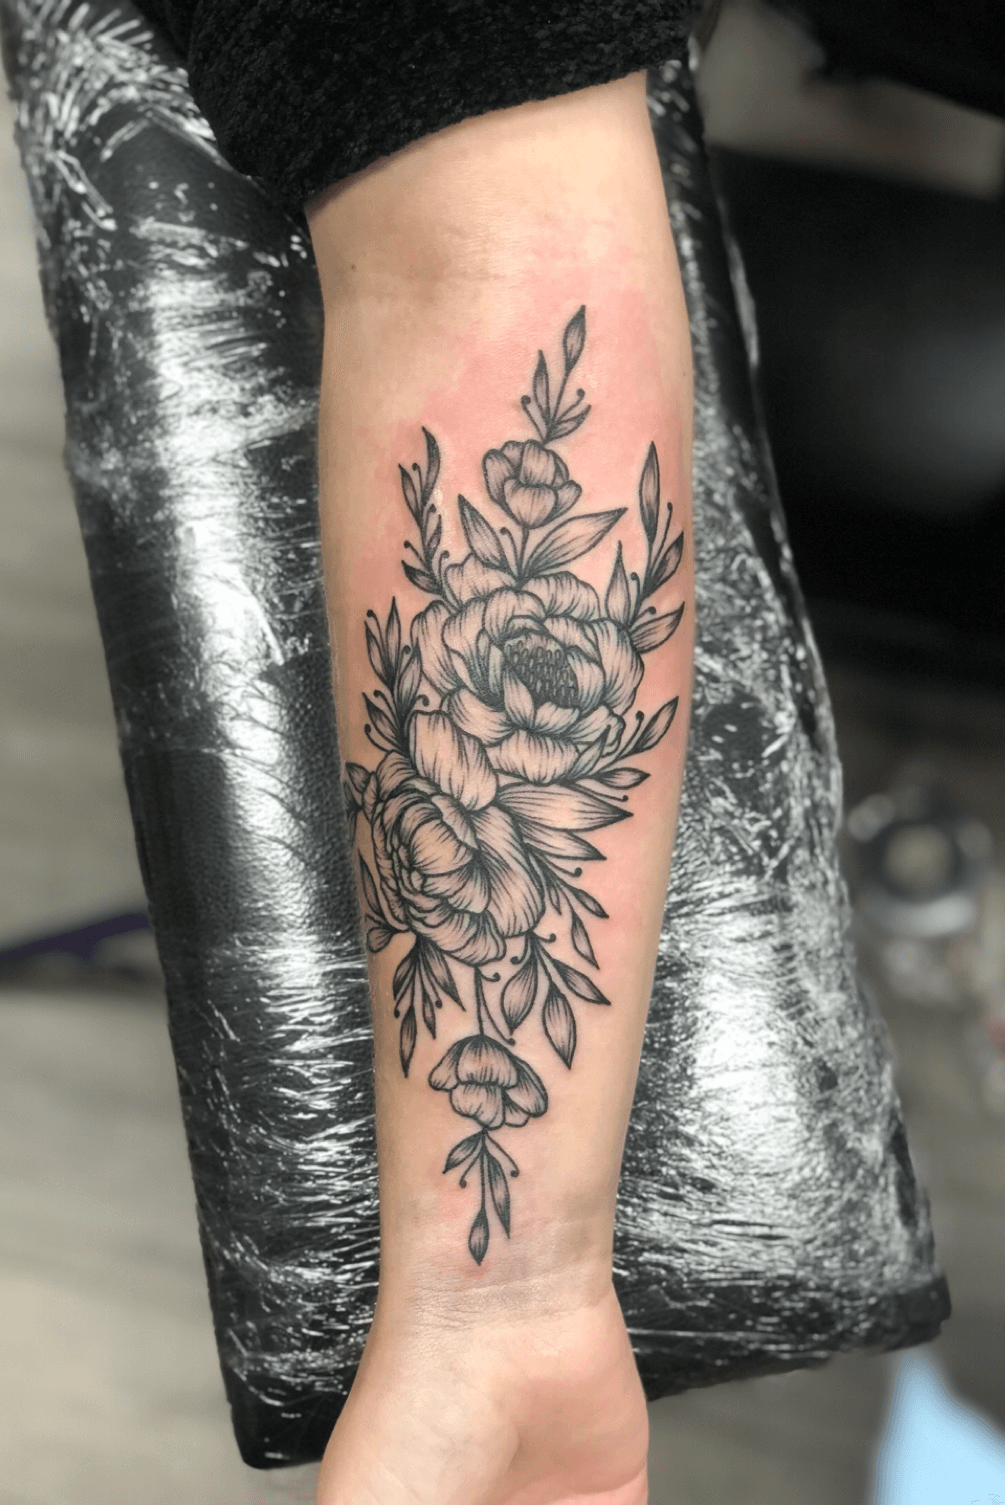 Tattoo uploaded by Tattoodo  Snake and Peonies tattoo by Henbo Henning  HenboHenning flowertattoos blackwork linework dotwork snake reptile  peony flowers floral nature  Tattoodo